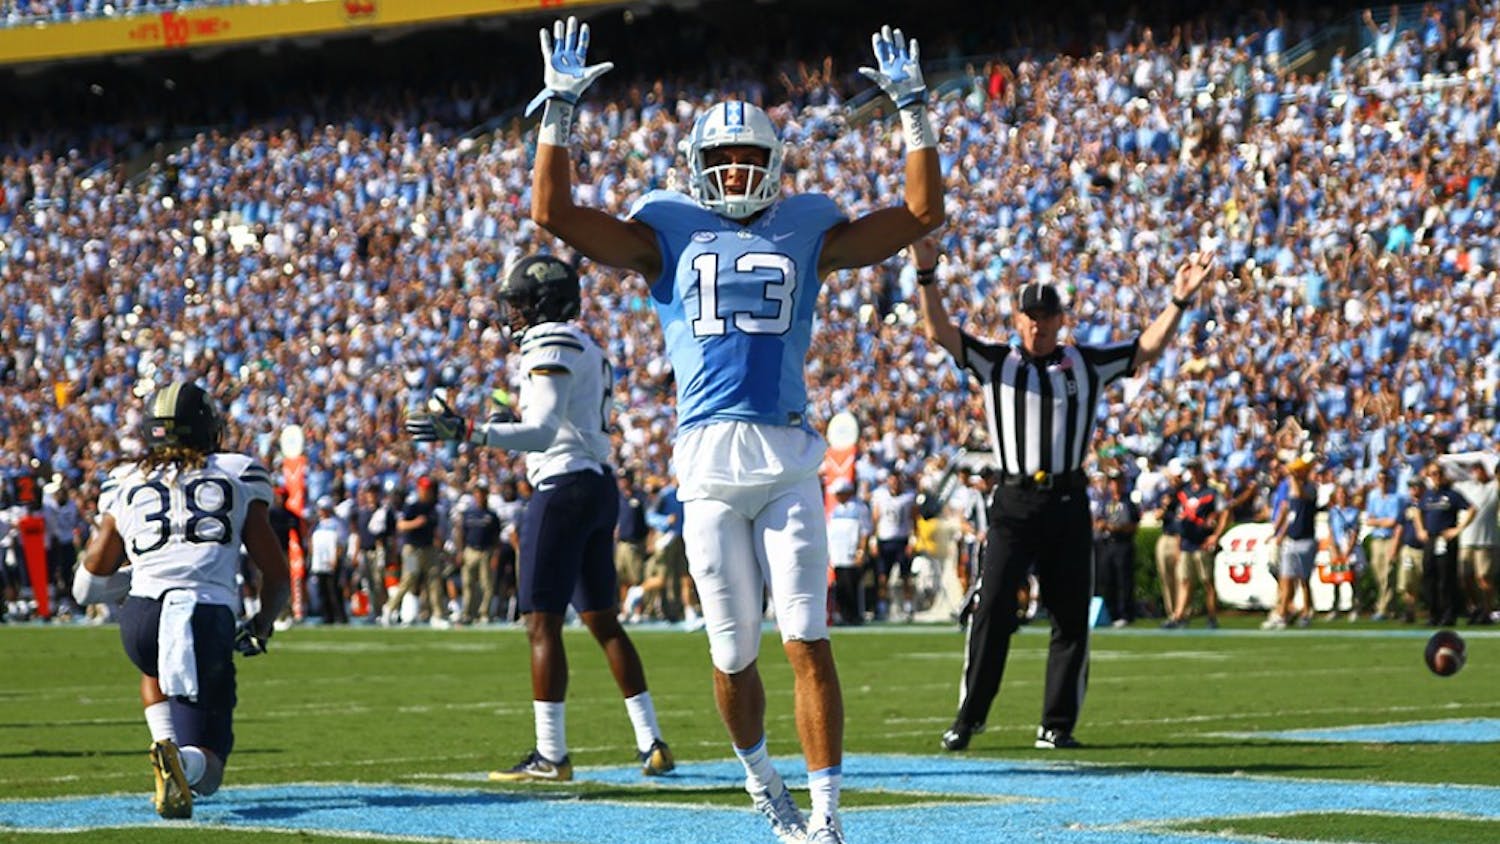 UNC wide receiver Mack Hollins (13) celebrates after scoring a touchdown against Pitt. The Tar Heels defeated the Panthers 37-36 on Saturday.